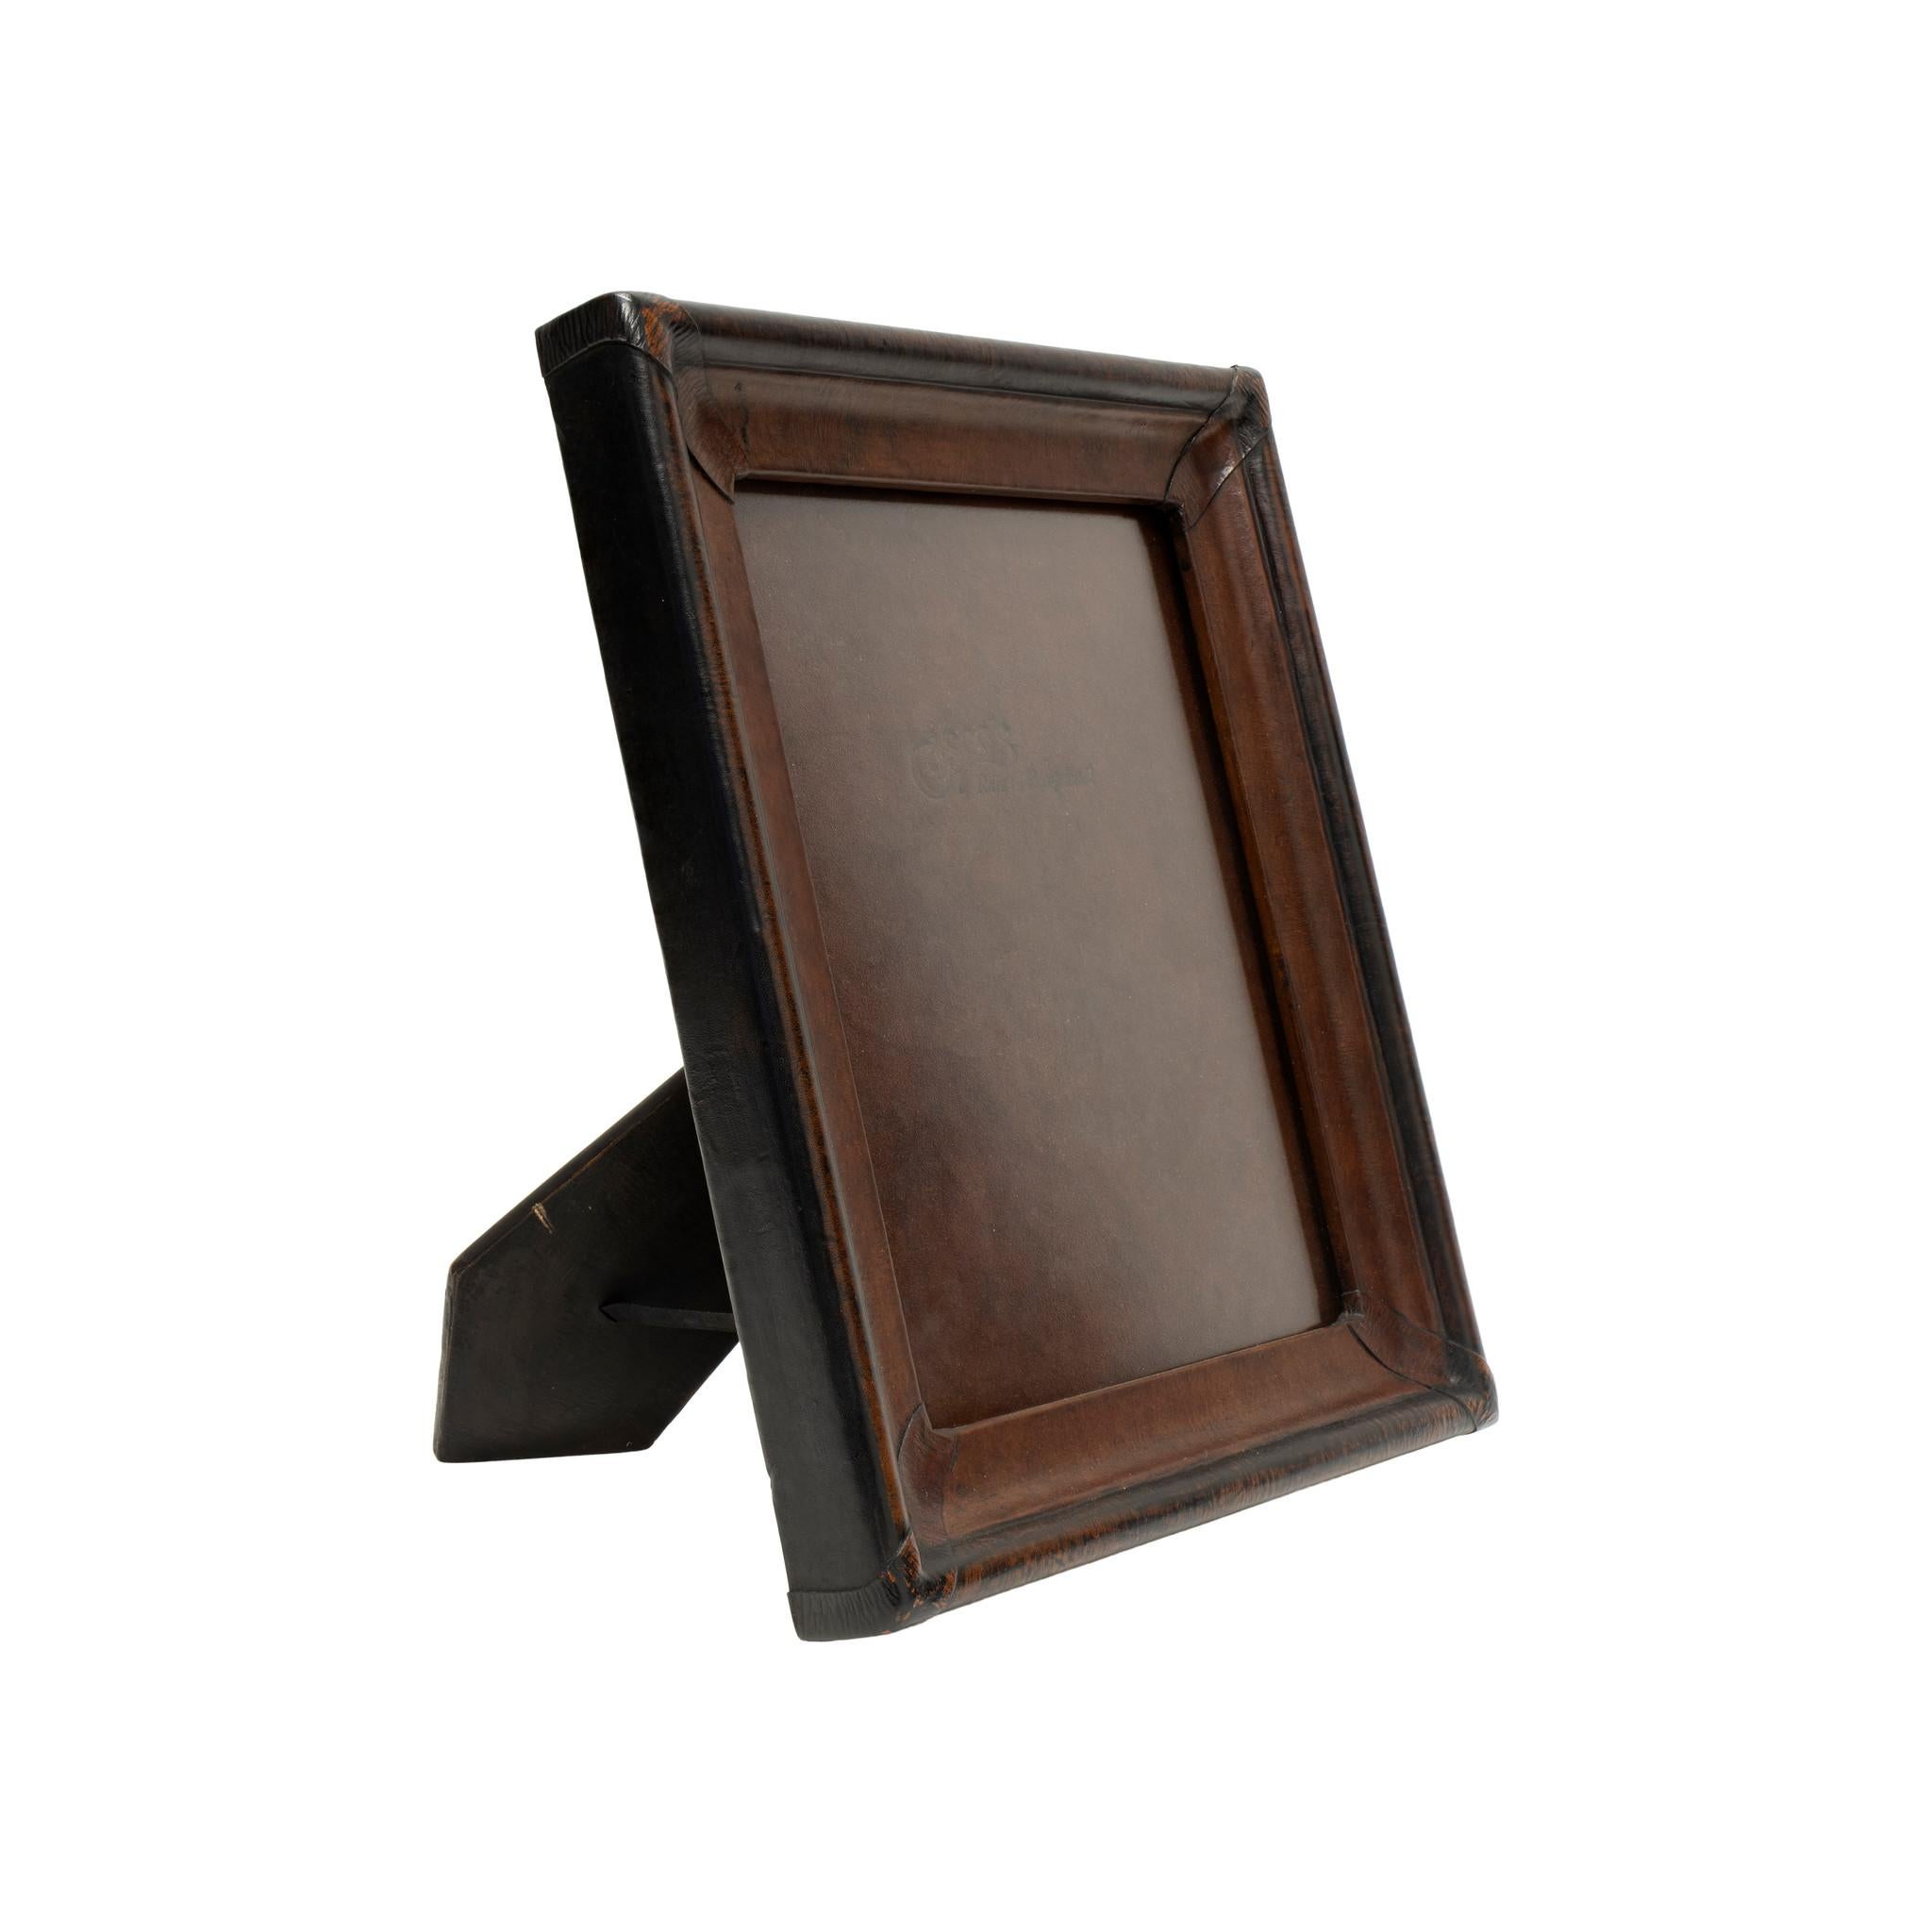 5x7 Dark Brown & Black Leather Tabletop Picture Frame - The Dressage In New Condition For Sale In Coeur d'Alene, ID